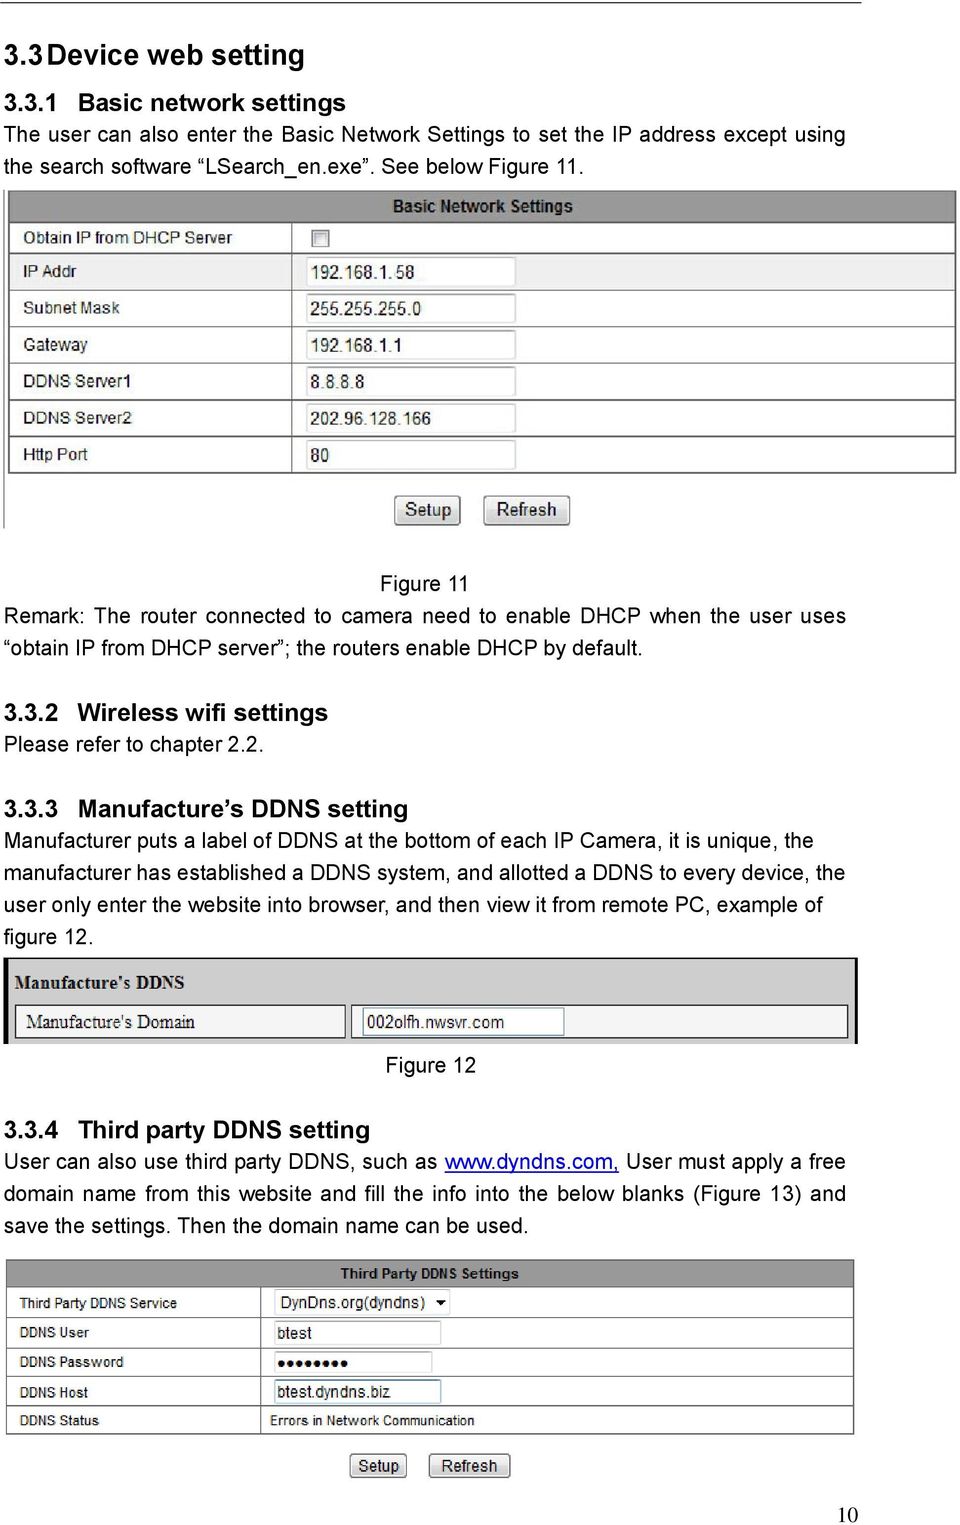 3.2 Wireless wifi settings Please refer to chapter 2.2. 3.3.3 Manufacture s DDNS setting Manufacturer puts a label of DDNS at the bottom of each IP Camera, it is unique, the manufacturer has